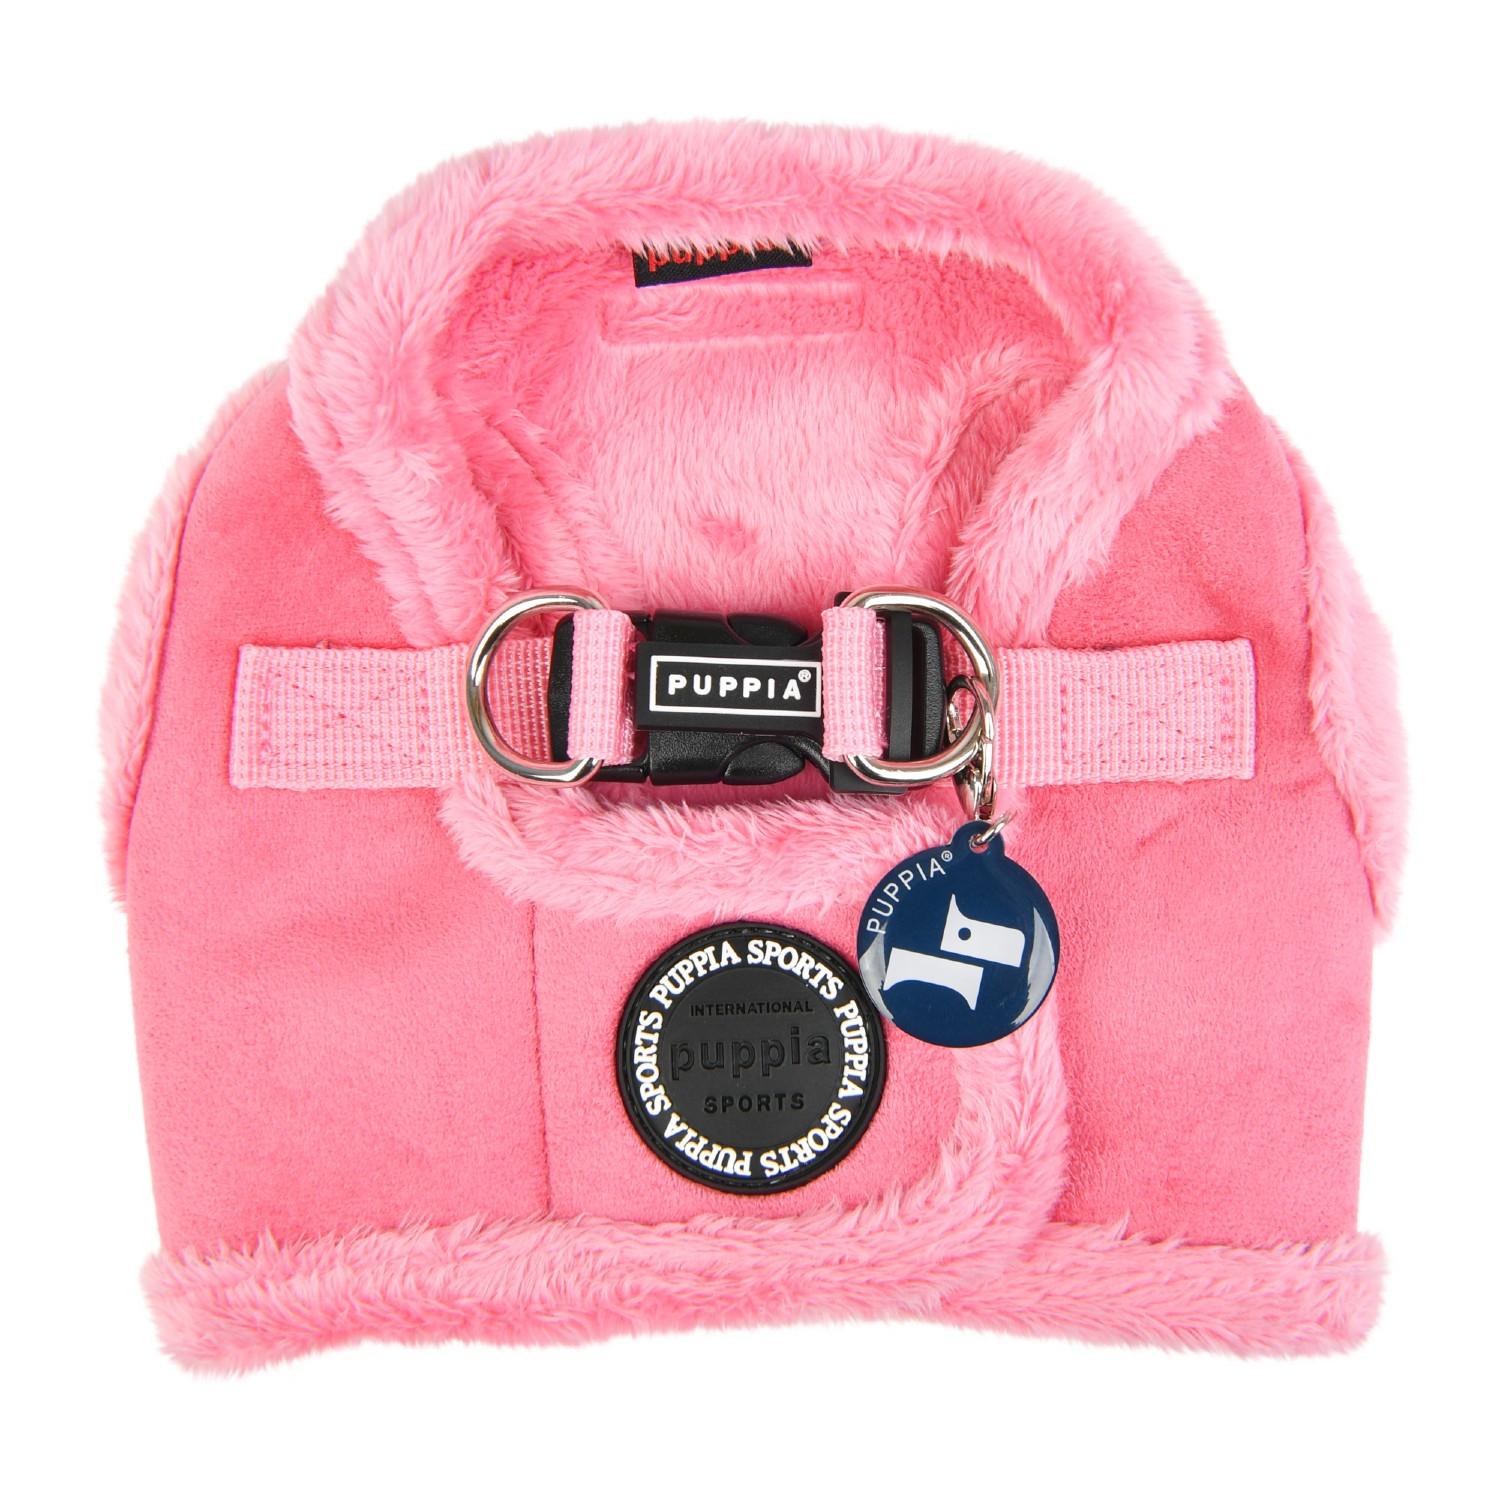 Terry Vest Dog Harness by Puppia - Pink